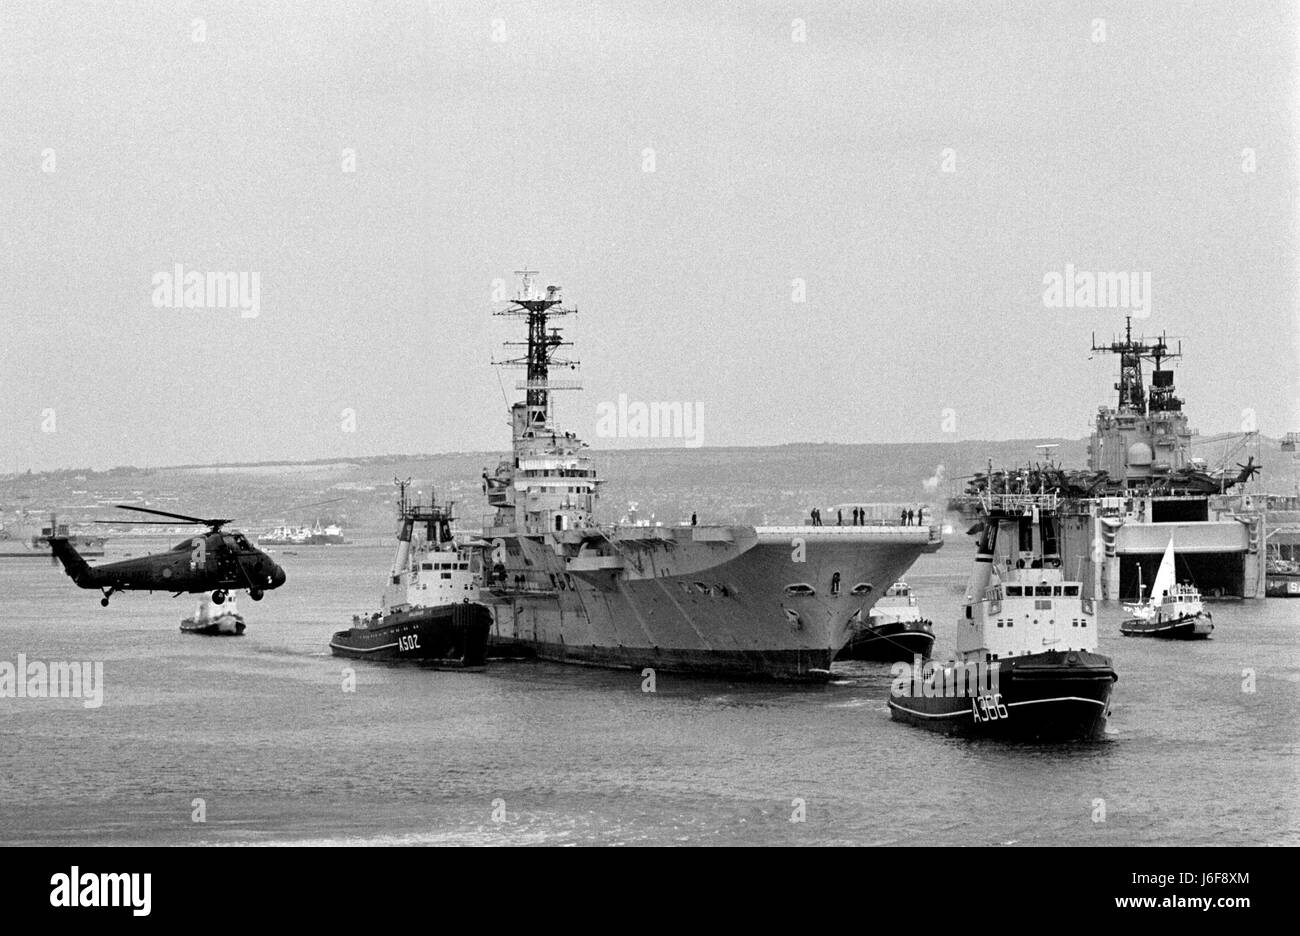 AJAXNETPHOTO. 1982. PORTSMOUTH, ENGLAND. - HMS BULWARK BEING TOWED OUT OF HARBOUR TO BE SCRAPPED.  PHOTO:JONATHAN EASTLAND/AJAX.  REF:100484 19A. Stock Photo